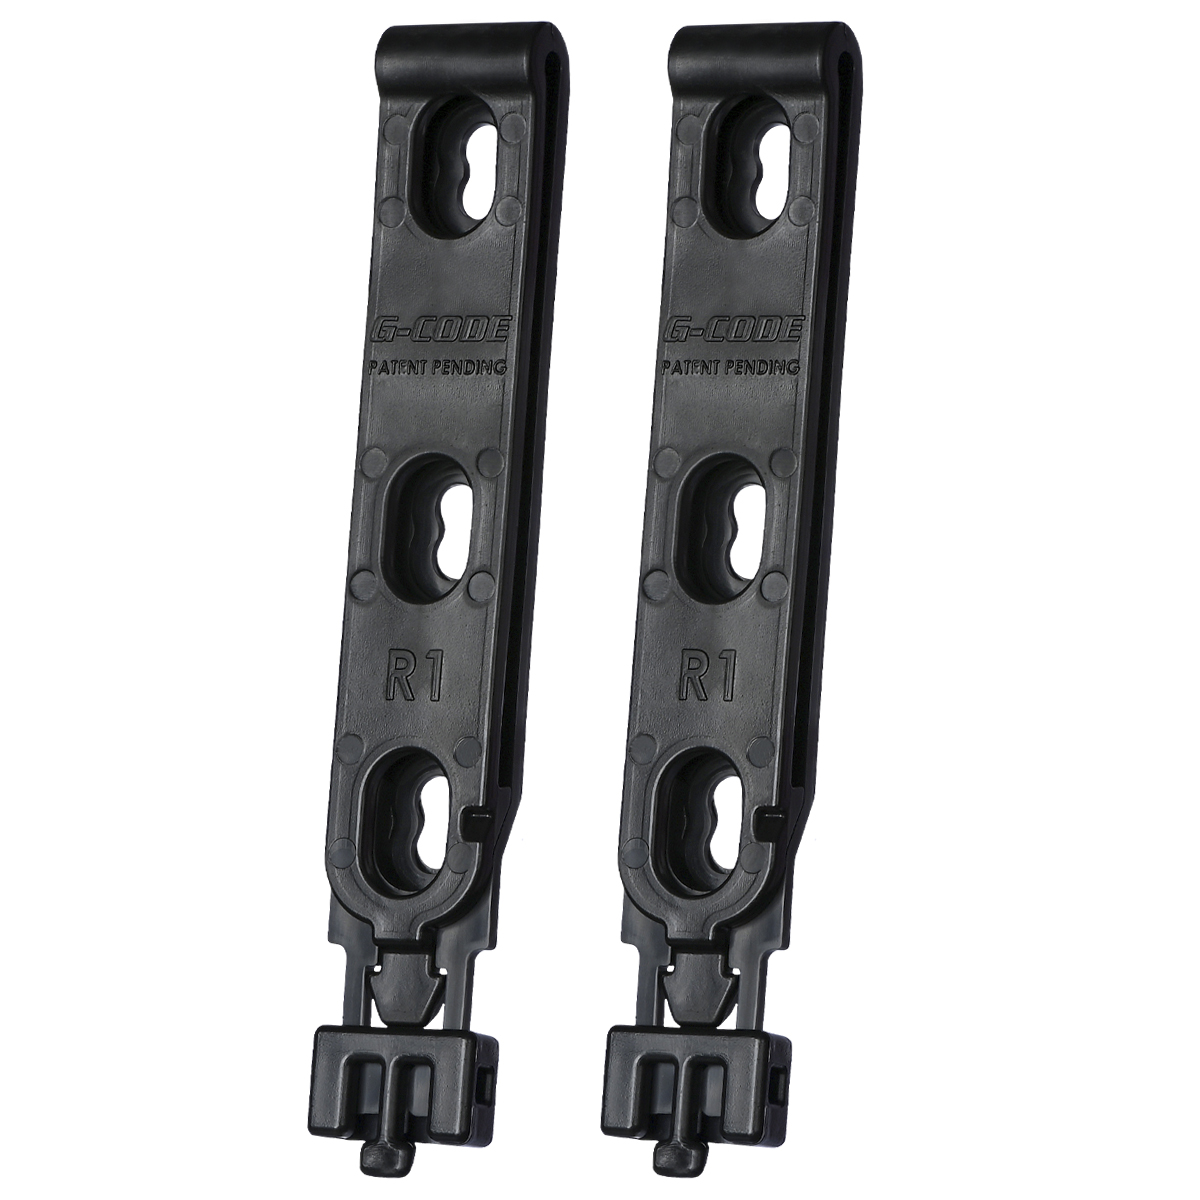 G-CODE R1 Molle Clips (Pair- with Hardware) 100% Made in USA